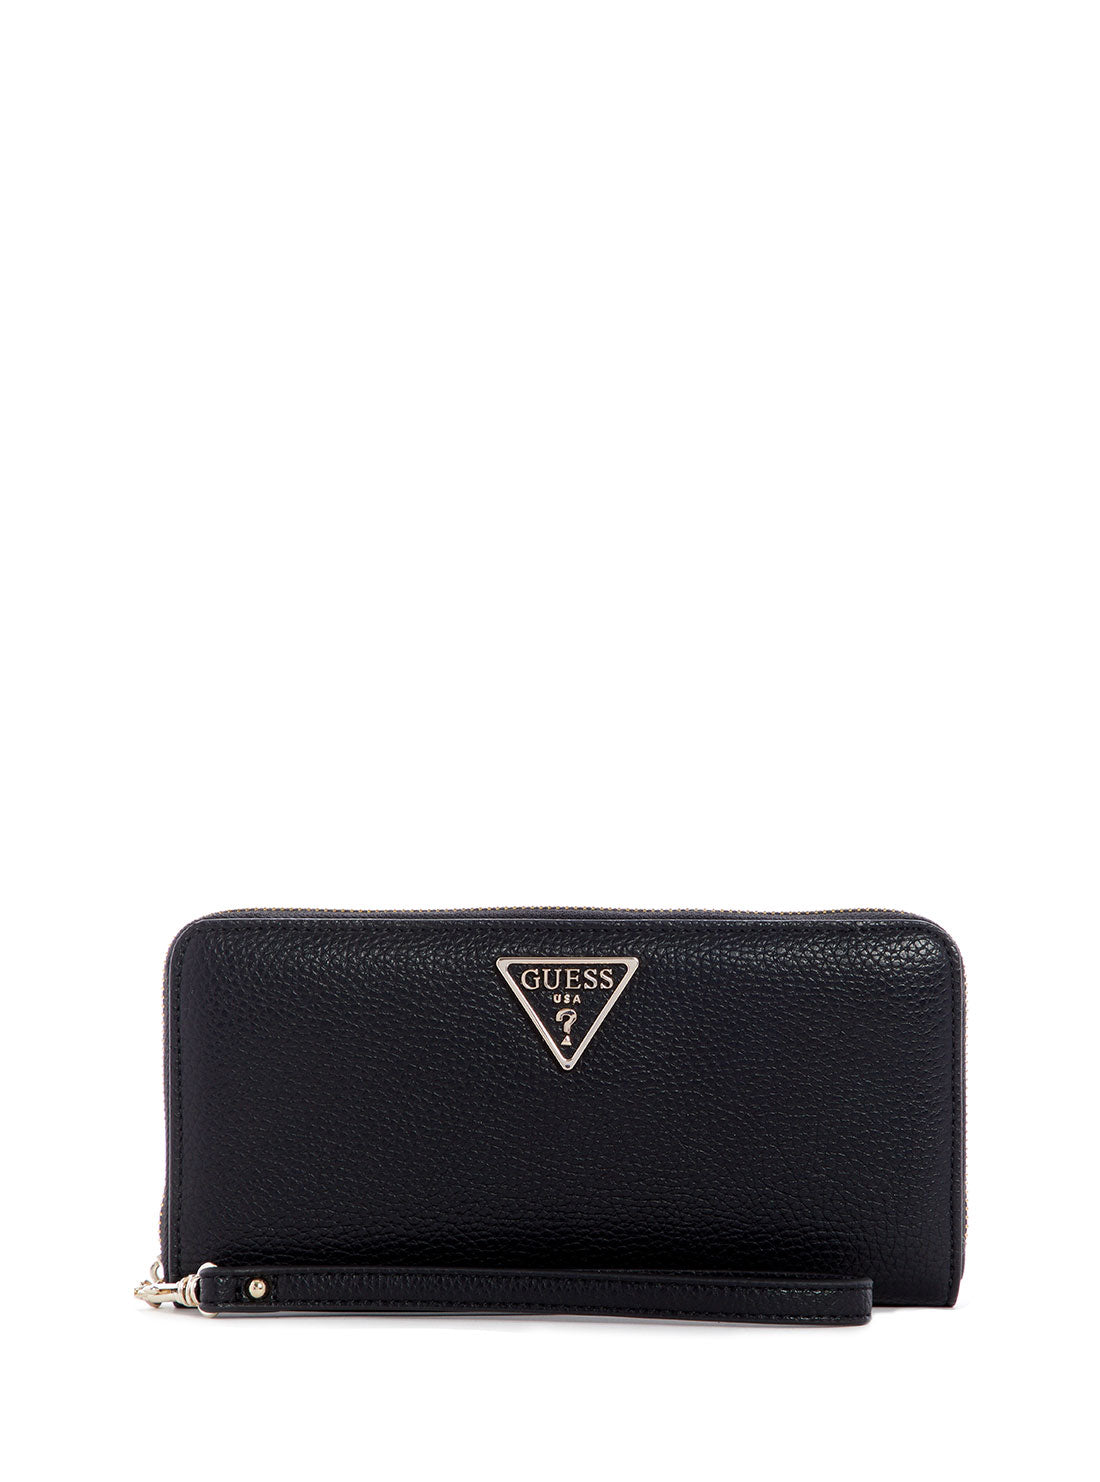 GUESS Black Large Zip Around Wallet front view